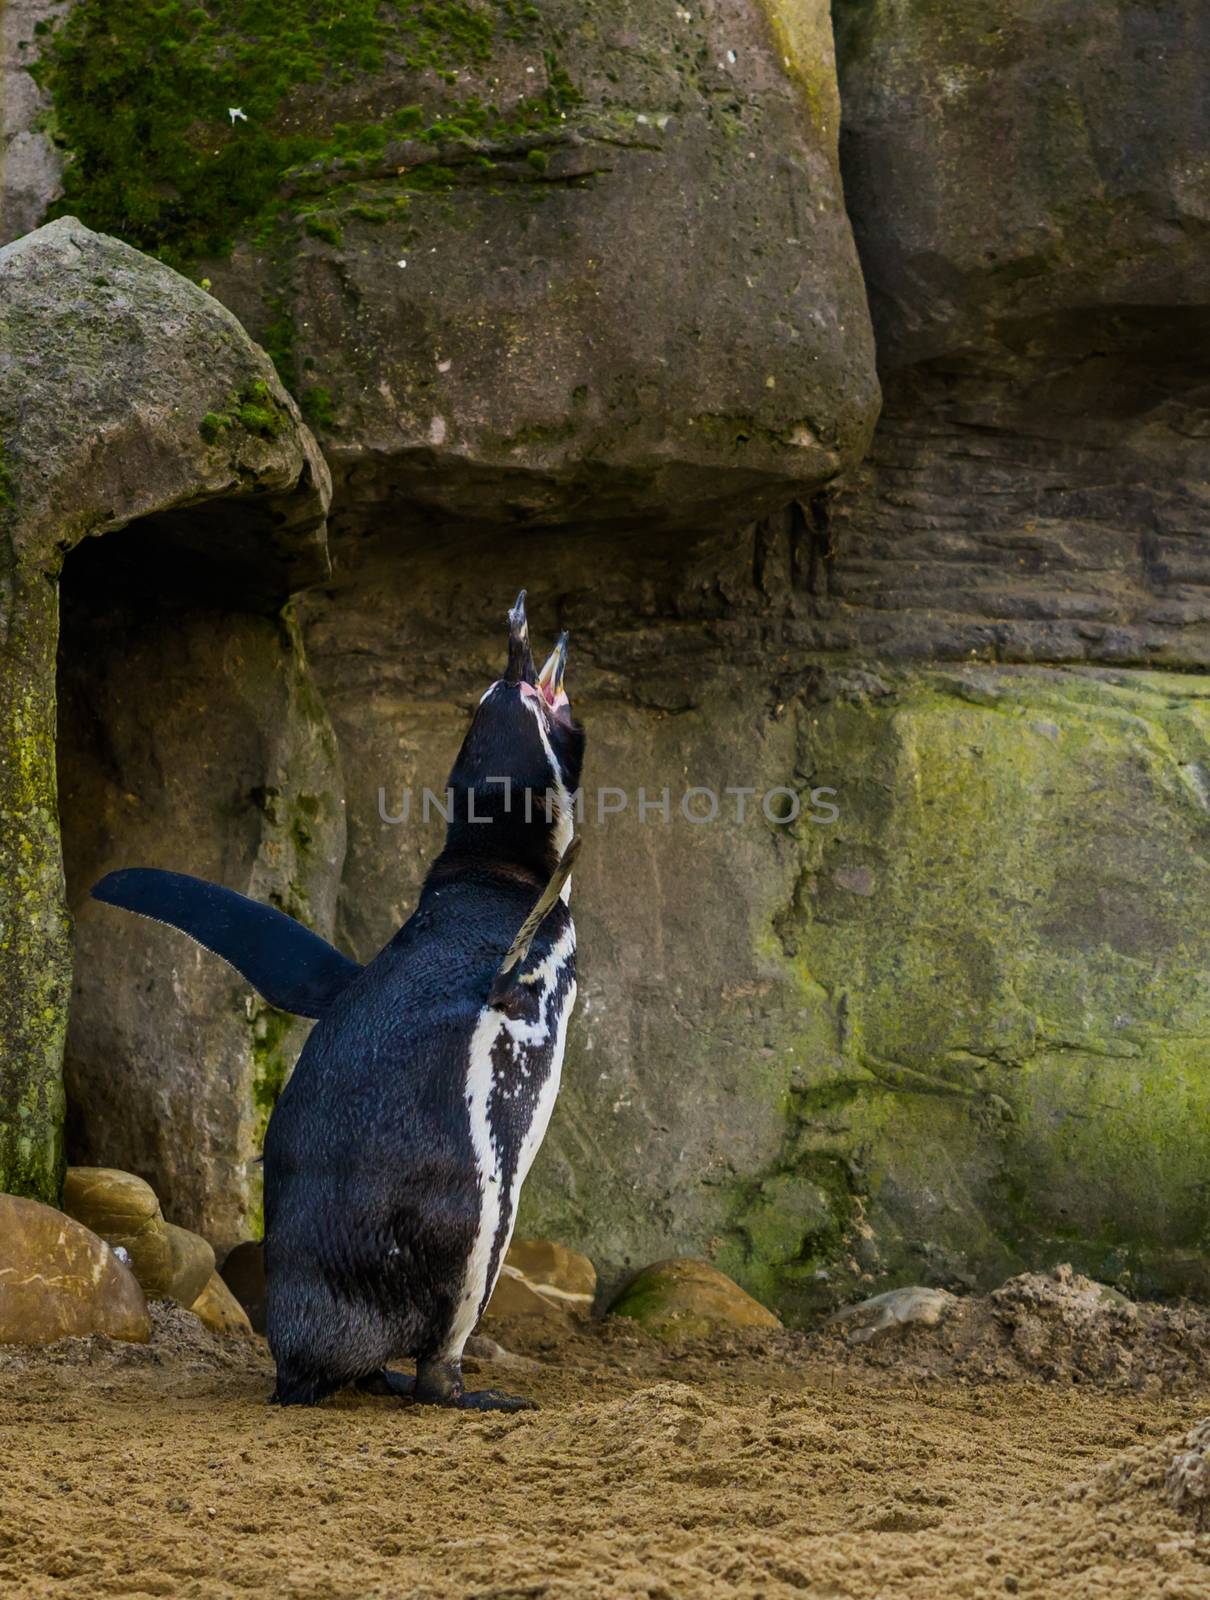 funny humboldt penguin screaming and making a hard sound, waterbird from the pacific coast, threatened animal specie by charlottebleijenberg